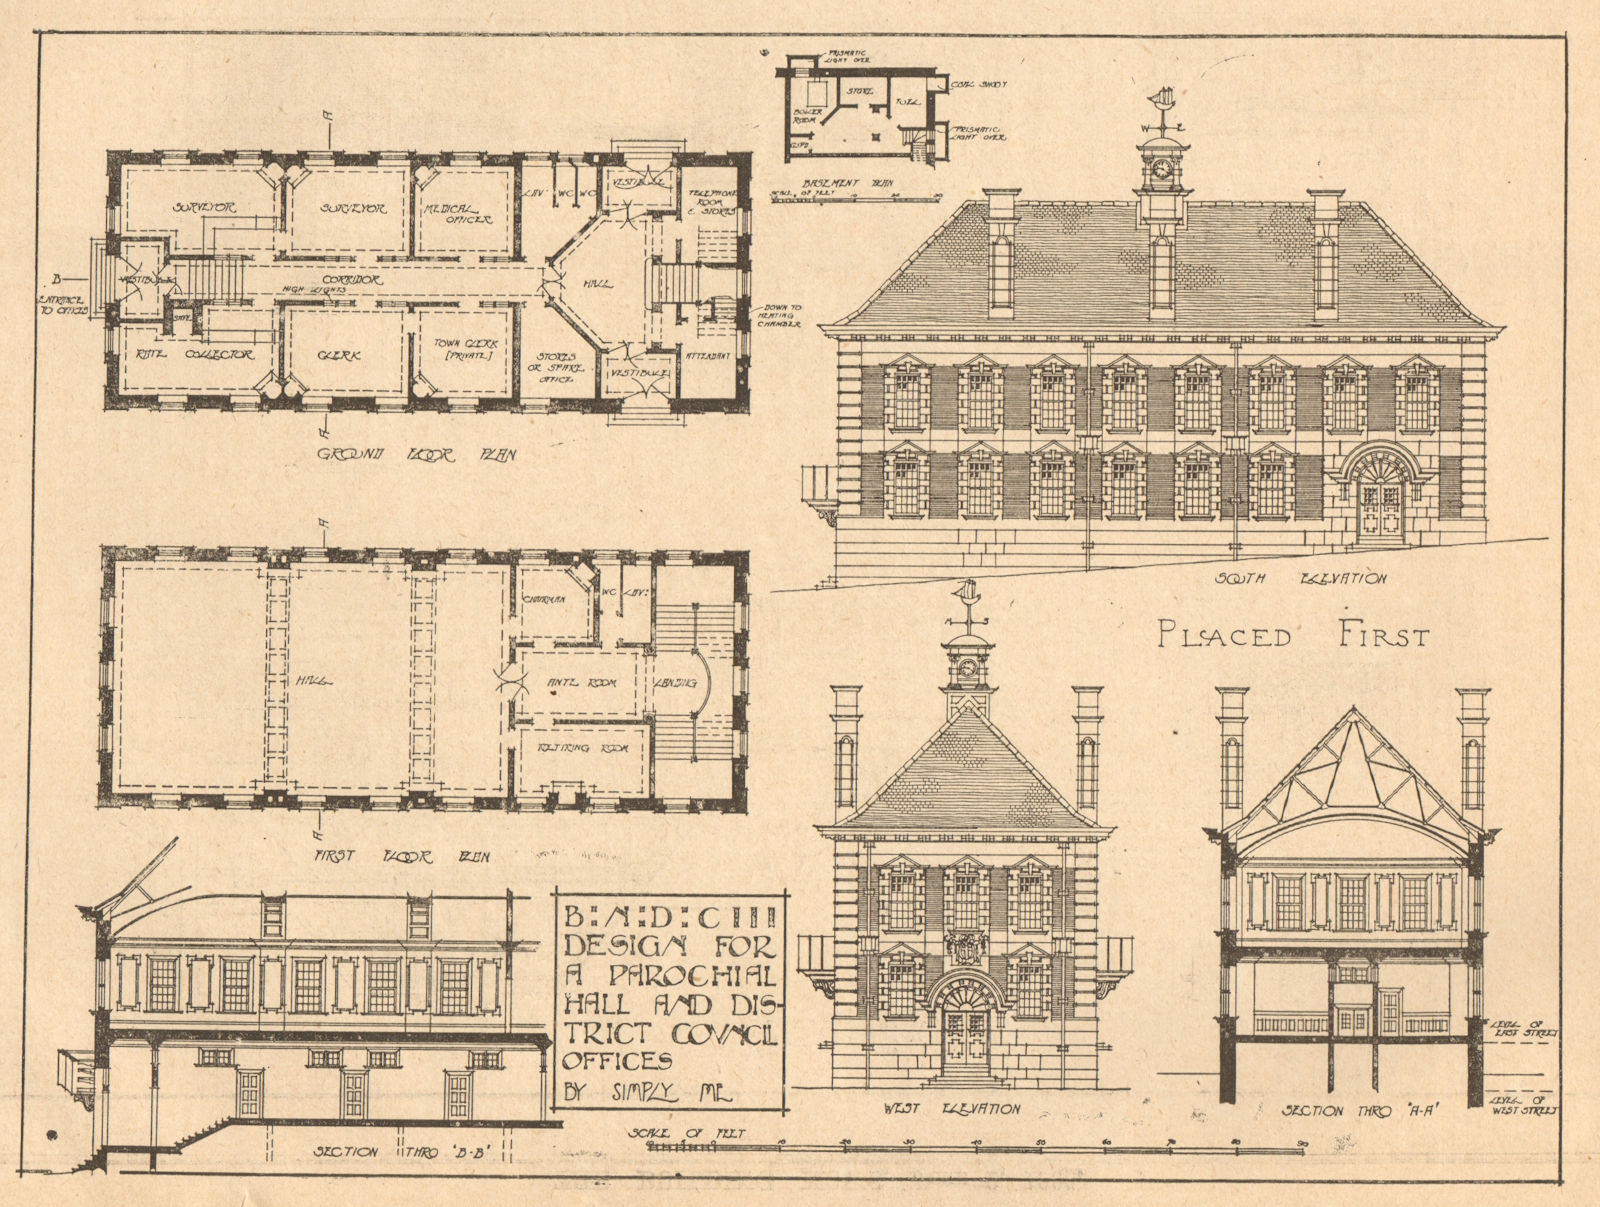 Associate Product Parochial hall & district council offices by Simply Me. Elevations & plans 1905